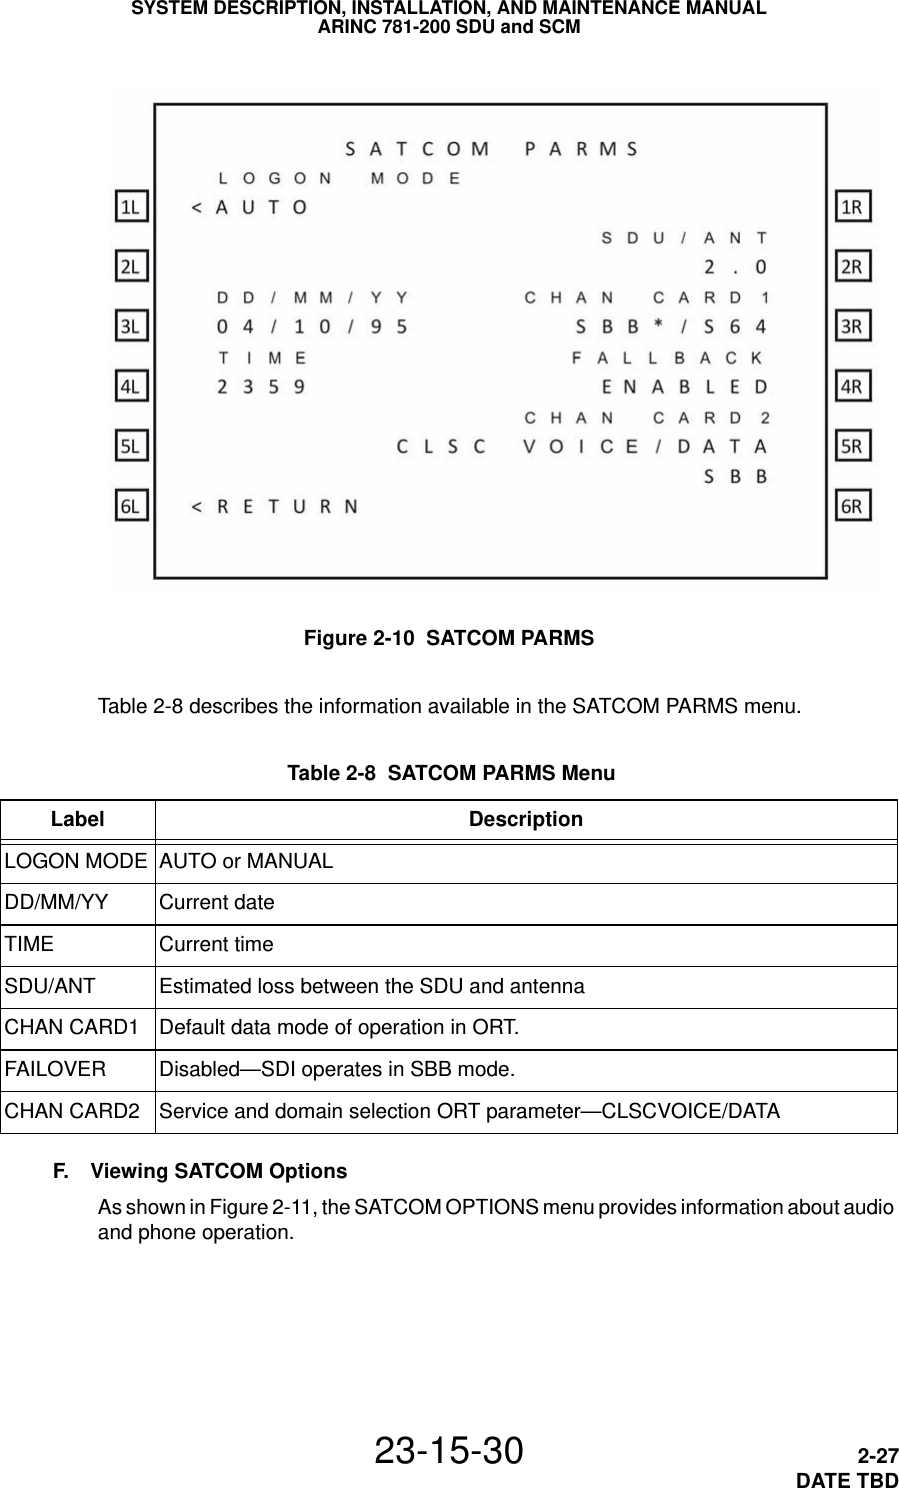 SYSTEM DESCRIPTION, INSTALLATION, AND MAINTENANCE MANUALARINC 781-200 SDU and SCM23-15-30 2-27DATE TBDFigure 2-10  SATCOM PARMSTable 2-8 describes the information available in the SATCOM PARMS menu. Table 2-8  SATCOM PARMS Menu Label DescriptionLOGON MODE AUTO or MANUALDD/MM/YY Current dateTIME Current timeSDU/ANT Estimated loss between the SDU and antennaCHAN CARD1 Default data mode of operation in ORT.FAILOVER Disabled—SDI operates in SBB mode.CHAN CARD2 Service and domain selection ORT parameter—CLSCVOICE/DATAF. Viewing SATCOM OptionsAs shown in Figure 2-11, the SATCOM OPTIONS menu provides information about audio and phone operation.